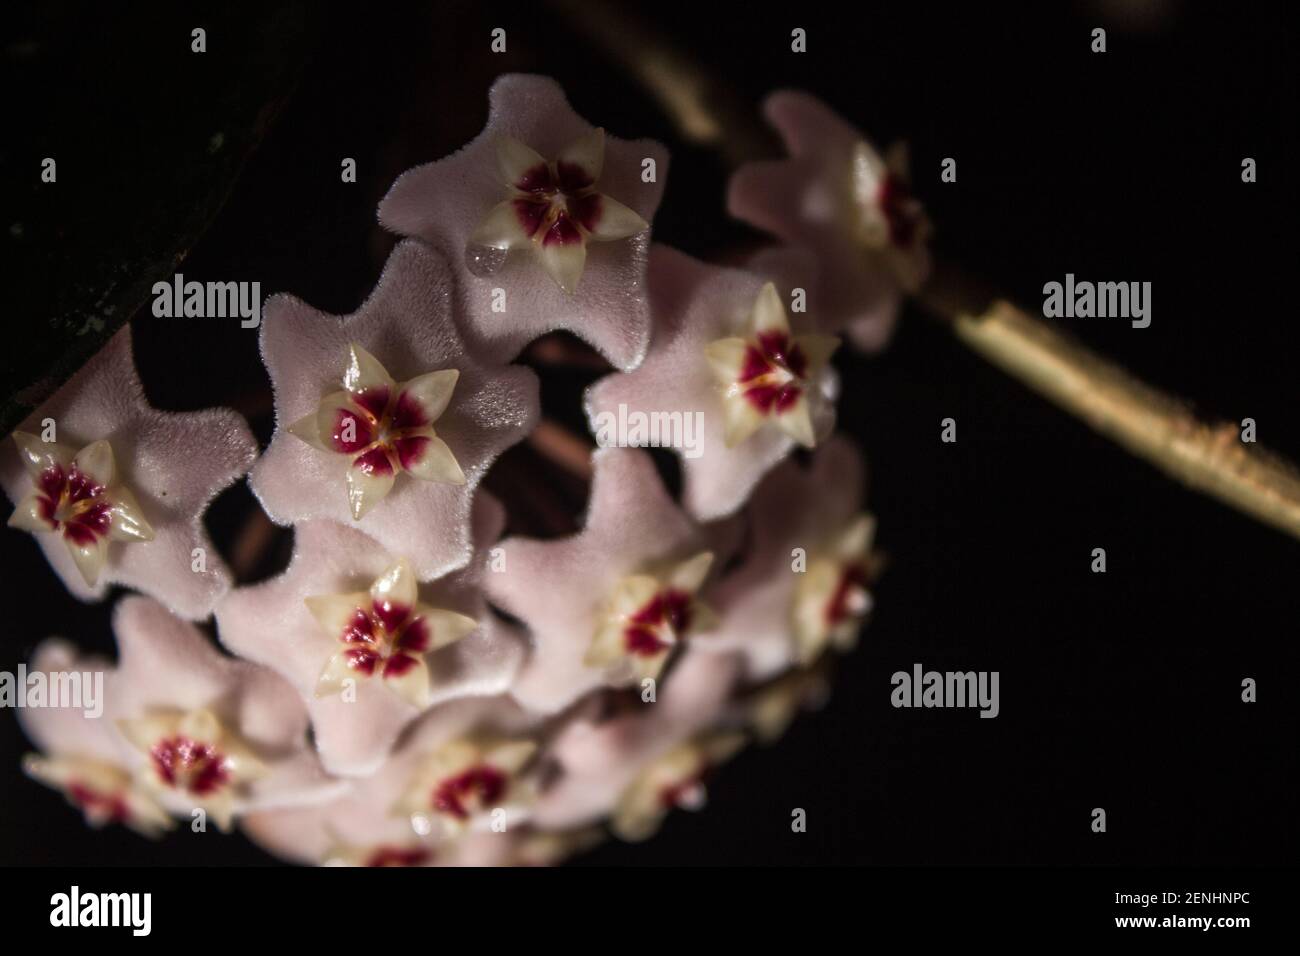 A cluster of the small pale pink flowers of the Hoya Carnosa, simply known as a Hoya Plant or wax Vine, against a black background, with droplets of N Stock Photo